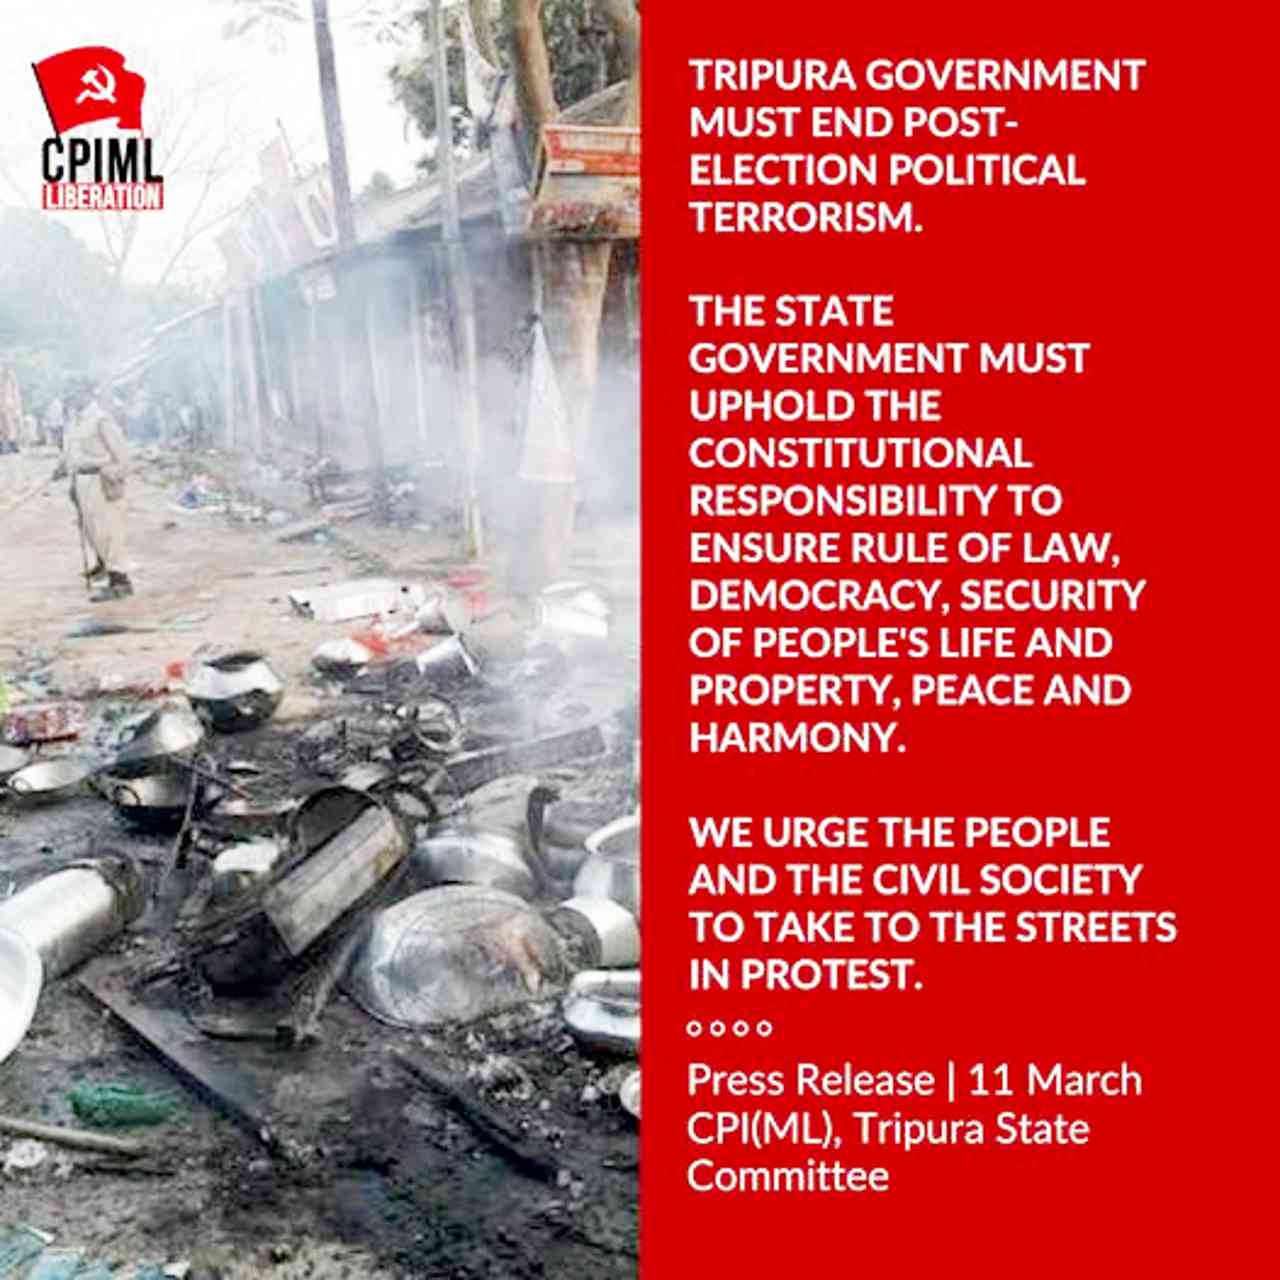 Tripura Government must End Post-election Political Terrorism 